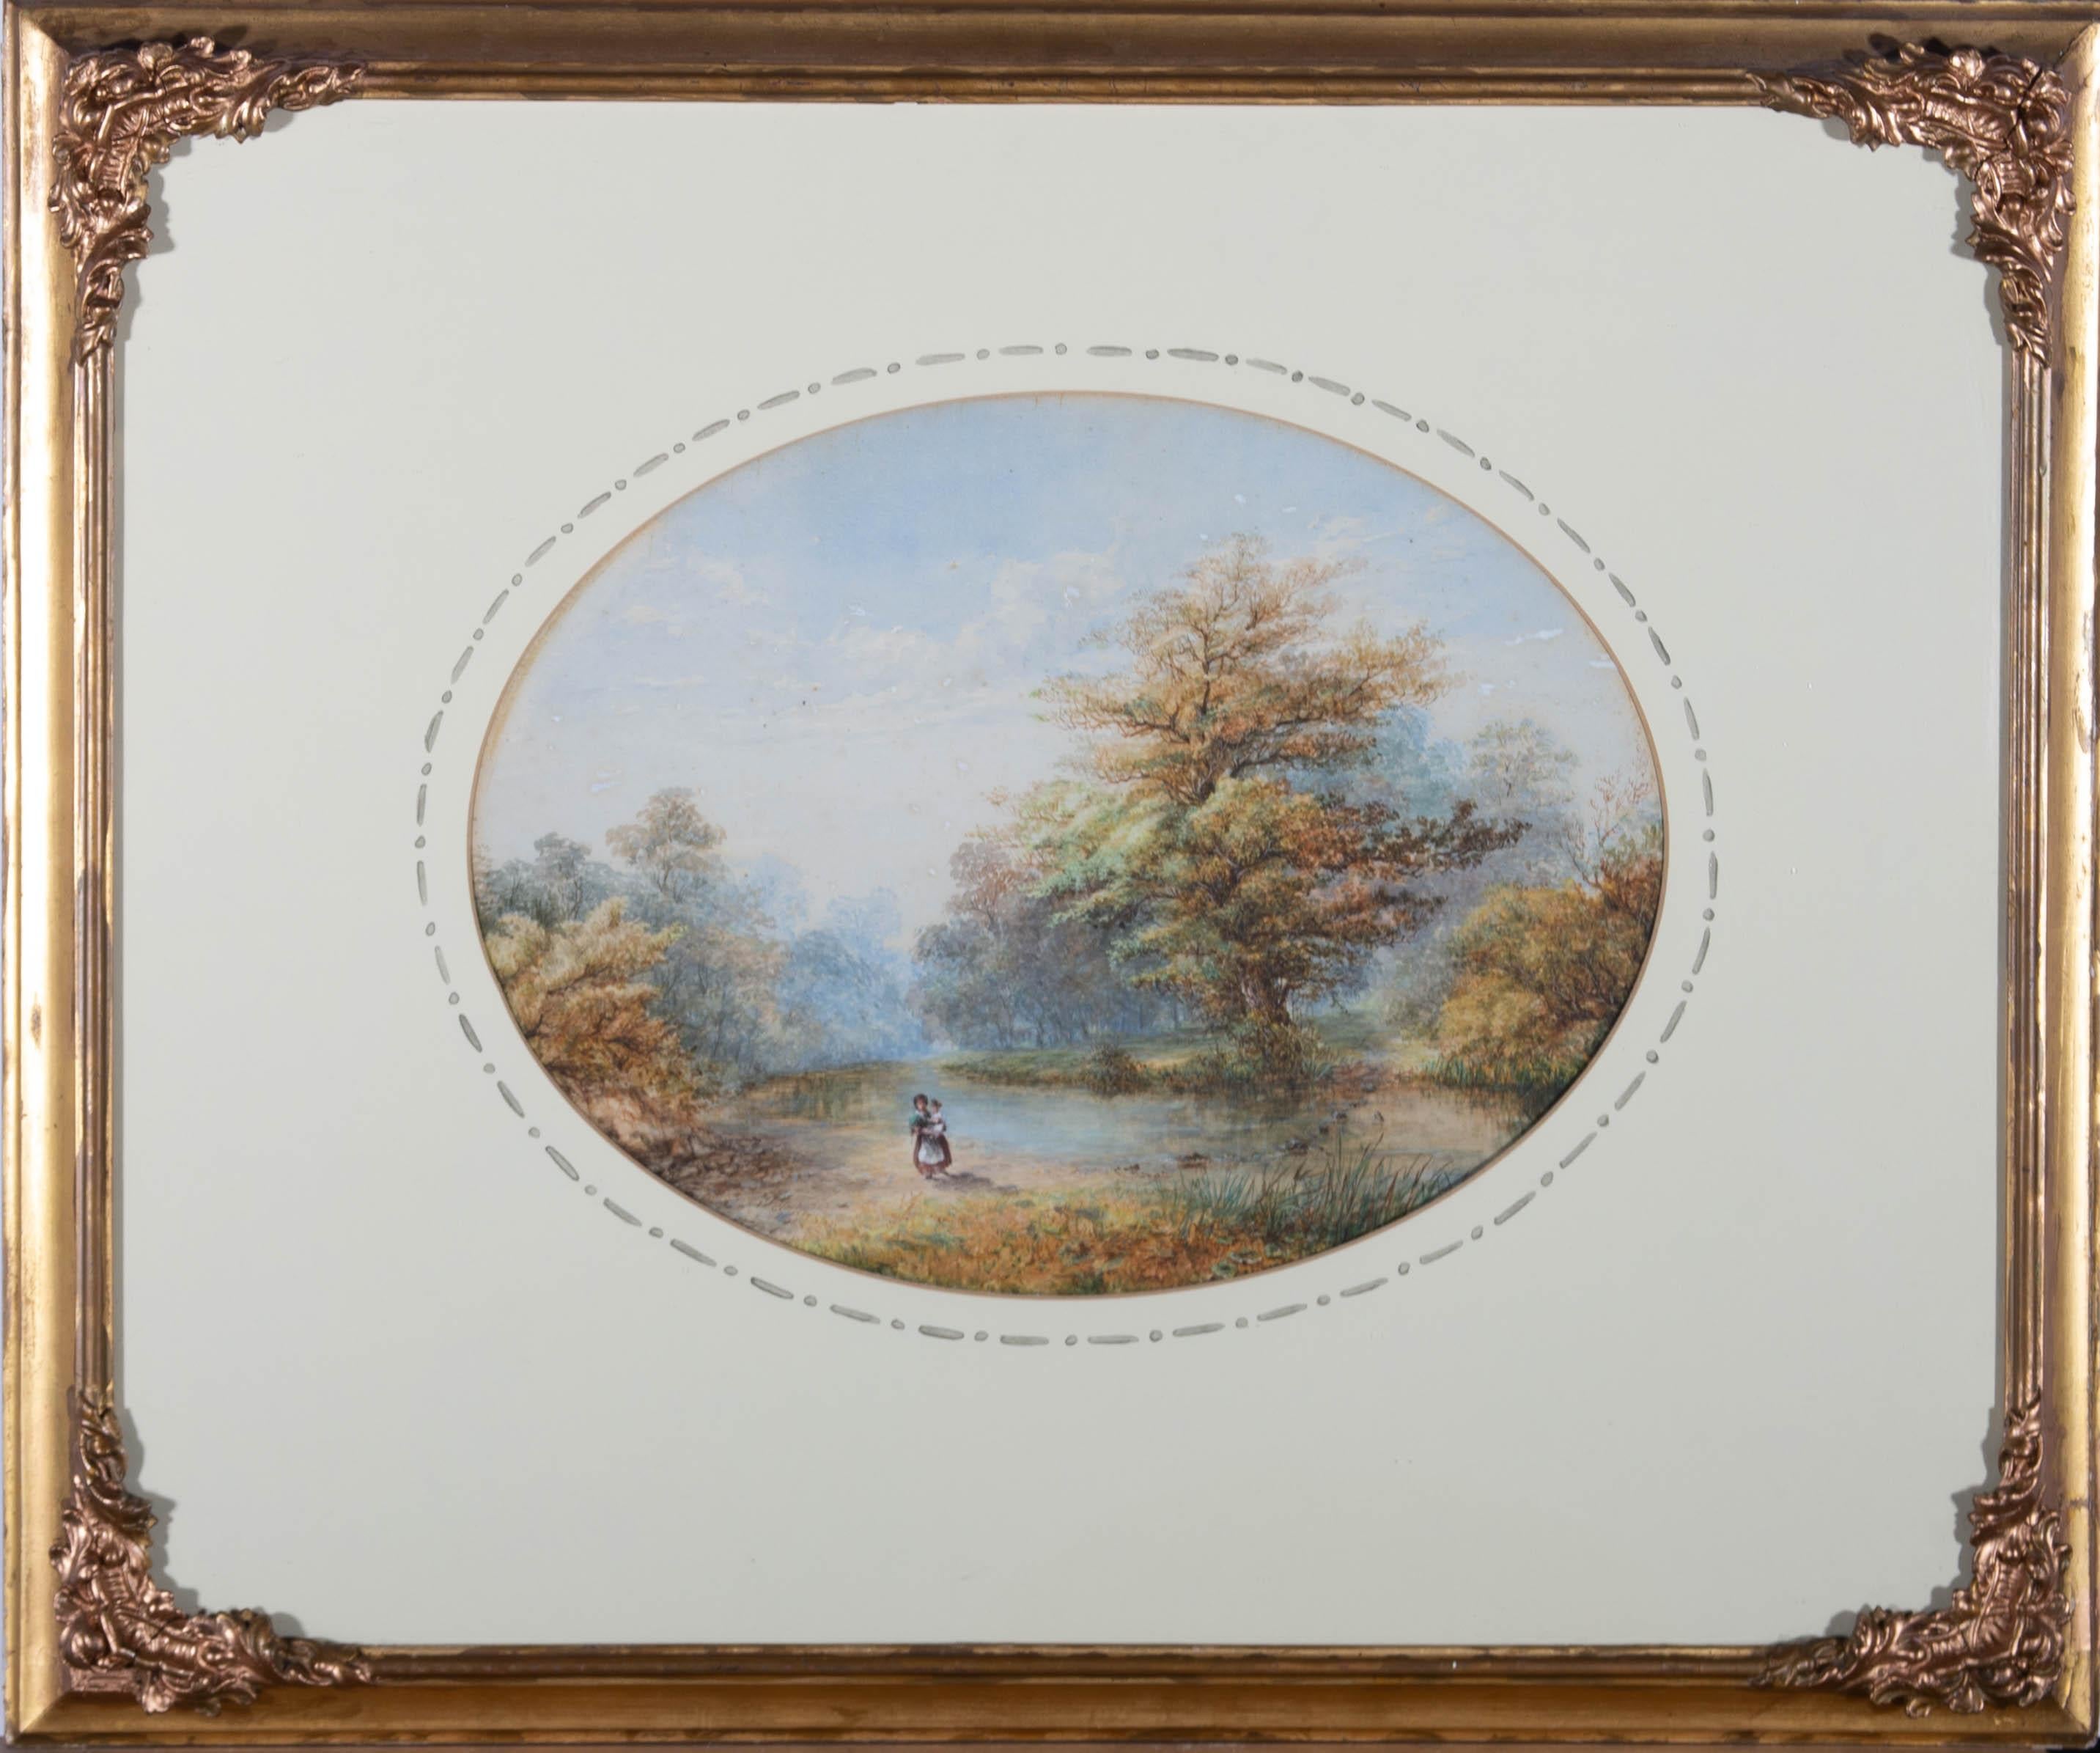 An idyllic rural landscape depicting a mother having just carried her child across the stepping stones on the nearby river. Presented on a cream mount with watercolour detailing and a gilt-effect wooden frame with ornate foliate moulding at the